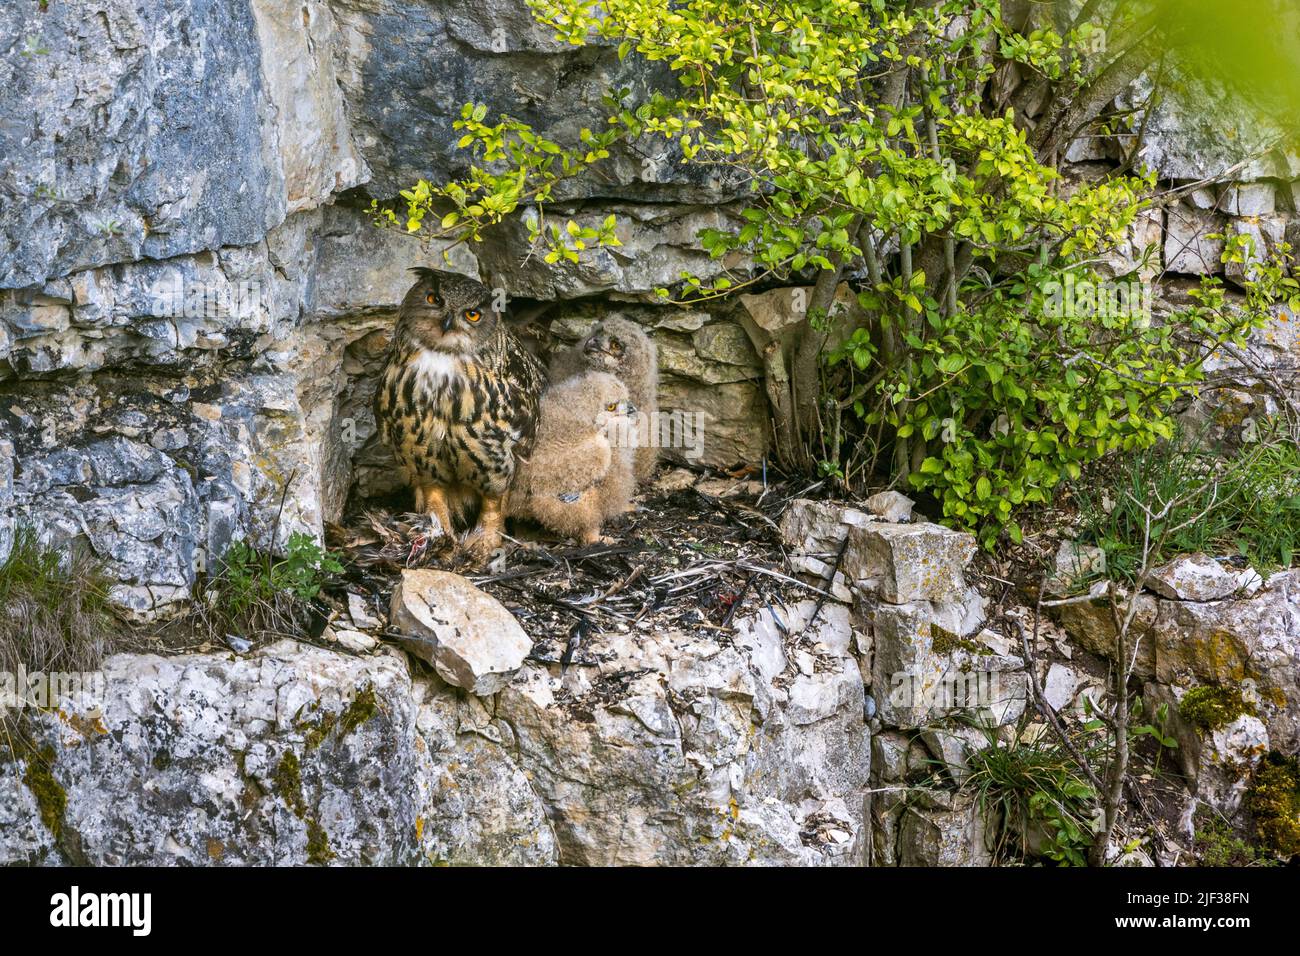 northern eagle owl (Bubo bubo), at the aerie with young animals, Germany, Baden-Wuerttemberg Stock Photo